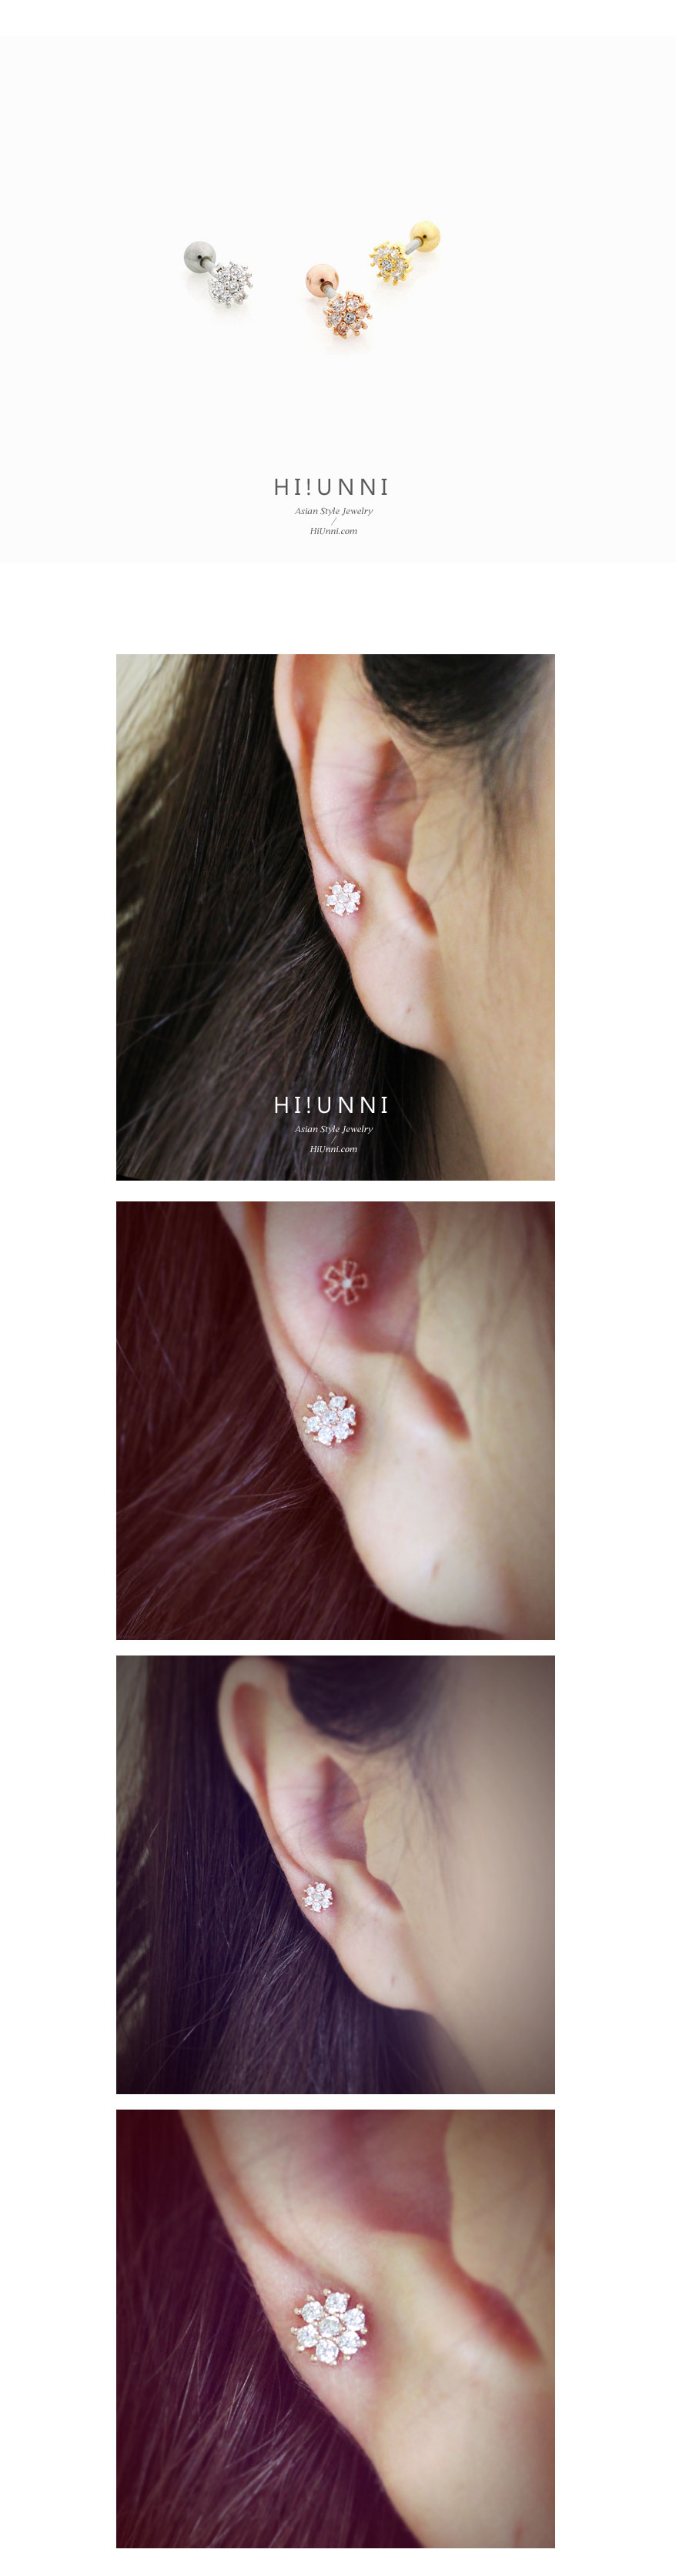 ear_studs_piercing_cartilage_earrings_16g_316l_surgical_korean_asian_style_jewelry_barbell_rose_gold_helix_conch_labret_tragus_flower_snow_3